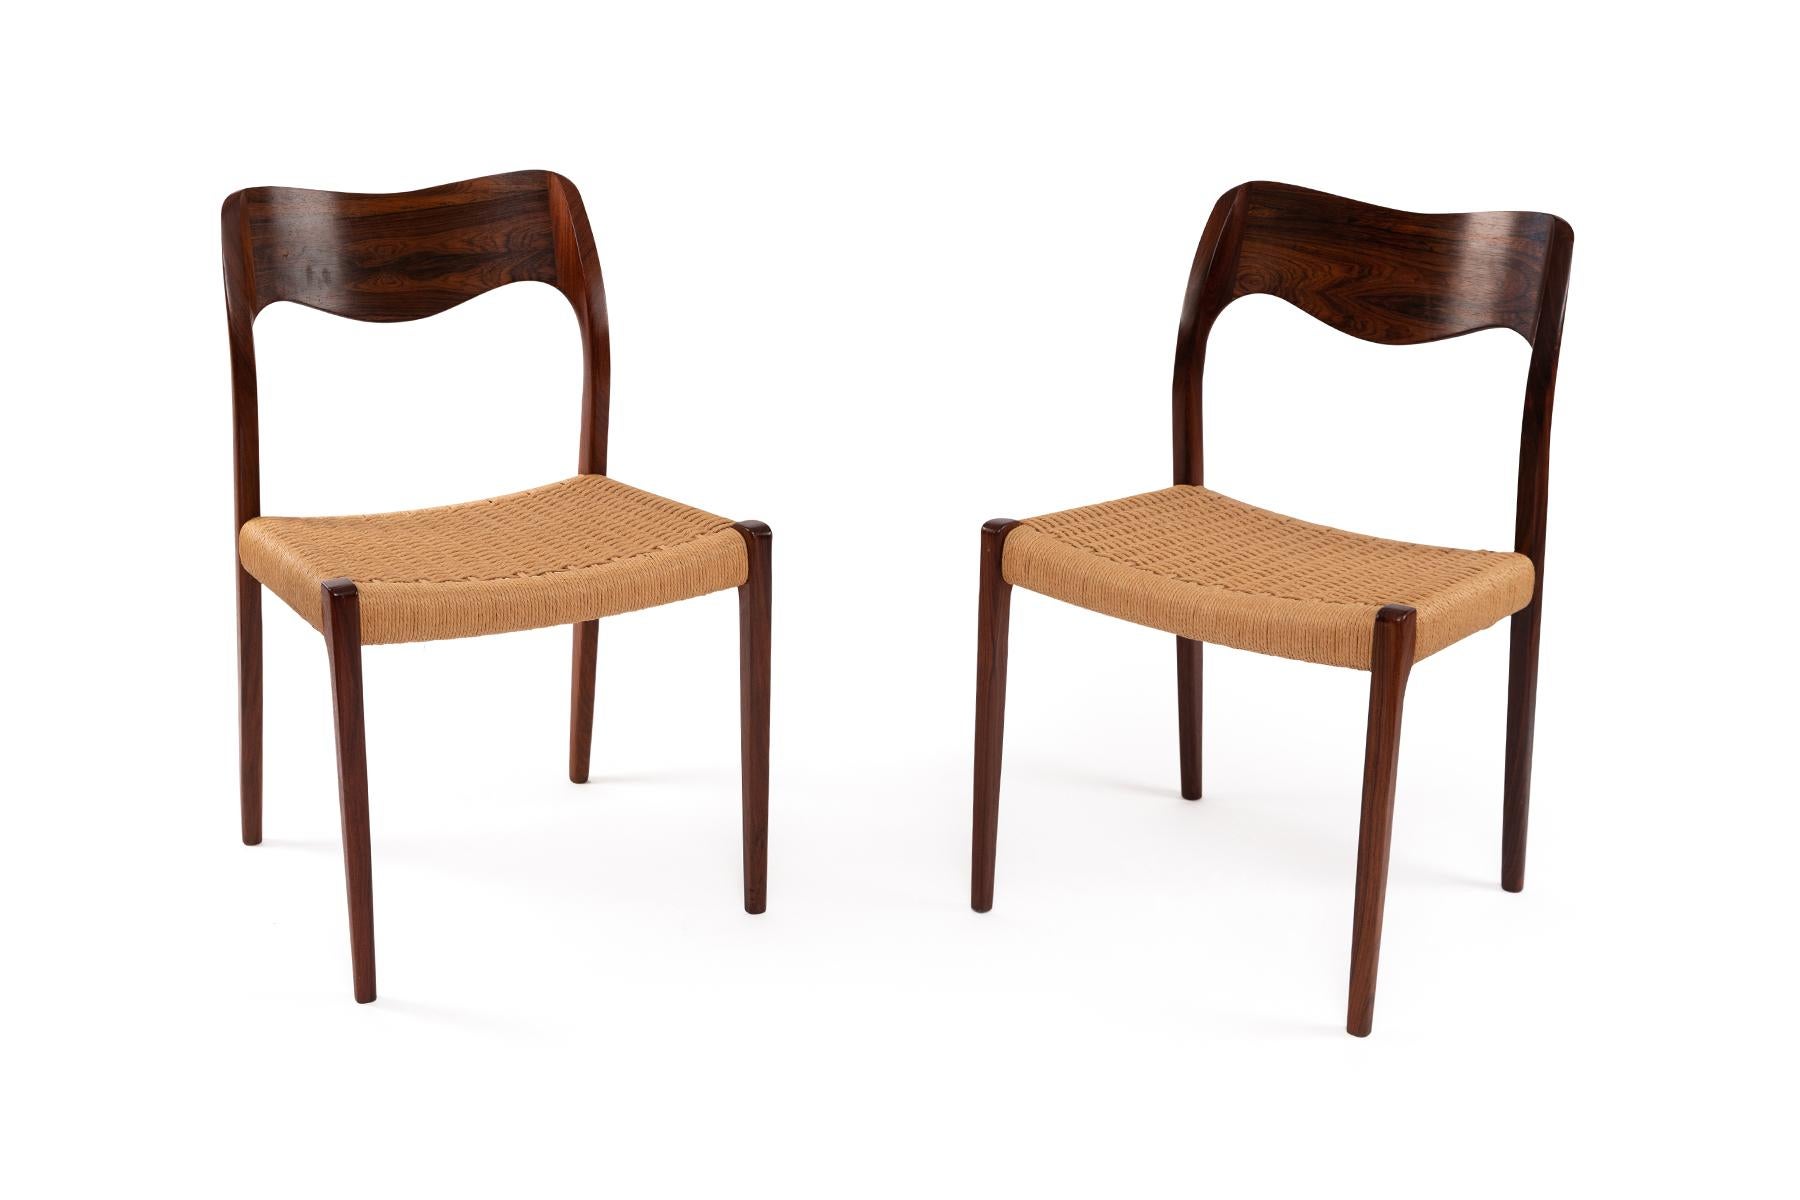 All original Brazilian rosewood and corded model 77 chairs by Niels Otto Møller. These chairs are in wonderful original condition and have stunning grain. Price listed is for the set of 6.